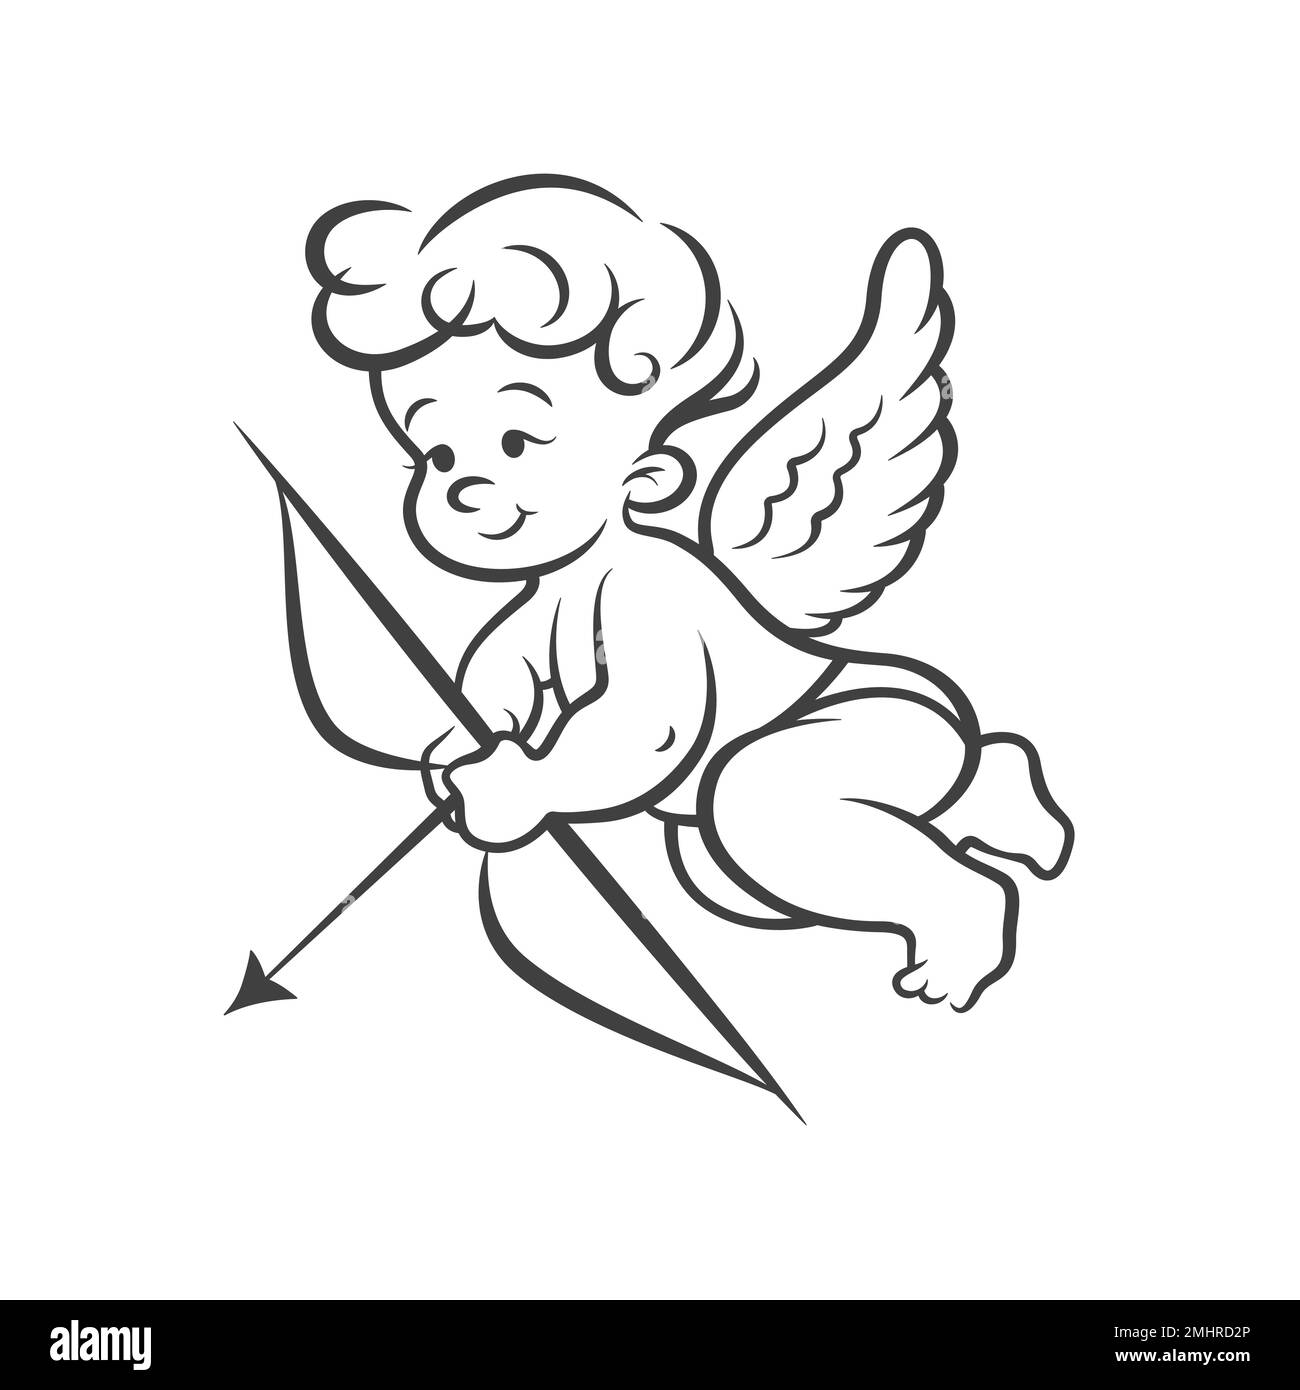 Flying Vector Cupid Boy Holding Bow, Aiming, Shooting Arrow, Hand Drawn with Outline in Retro, Vintage Comic Style. God of Love, Amor, Eros or Stock Vector